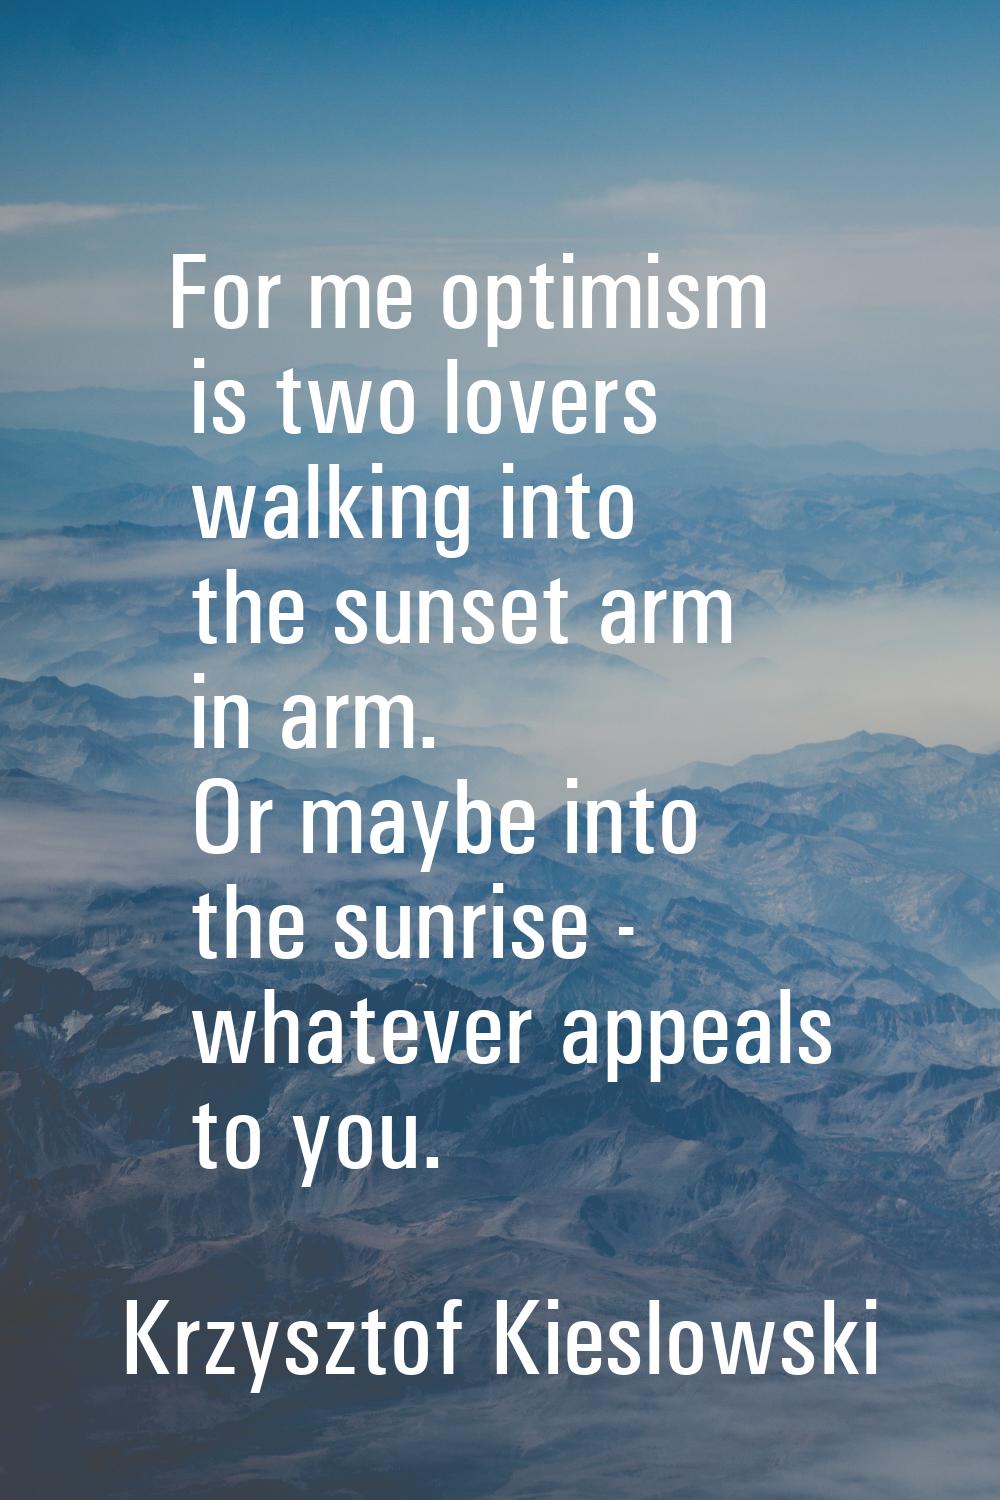 For me optimism is two lovers walking into the sunset arm in arm. Or maybe into the sunrise - whate